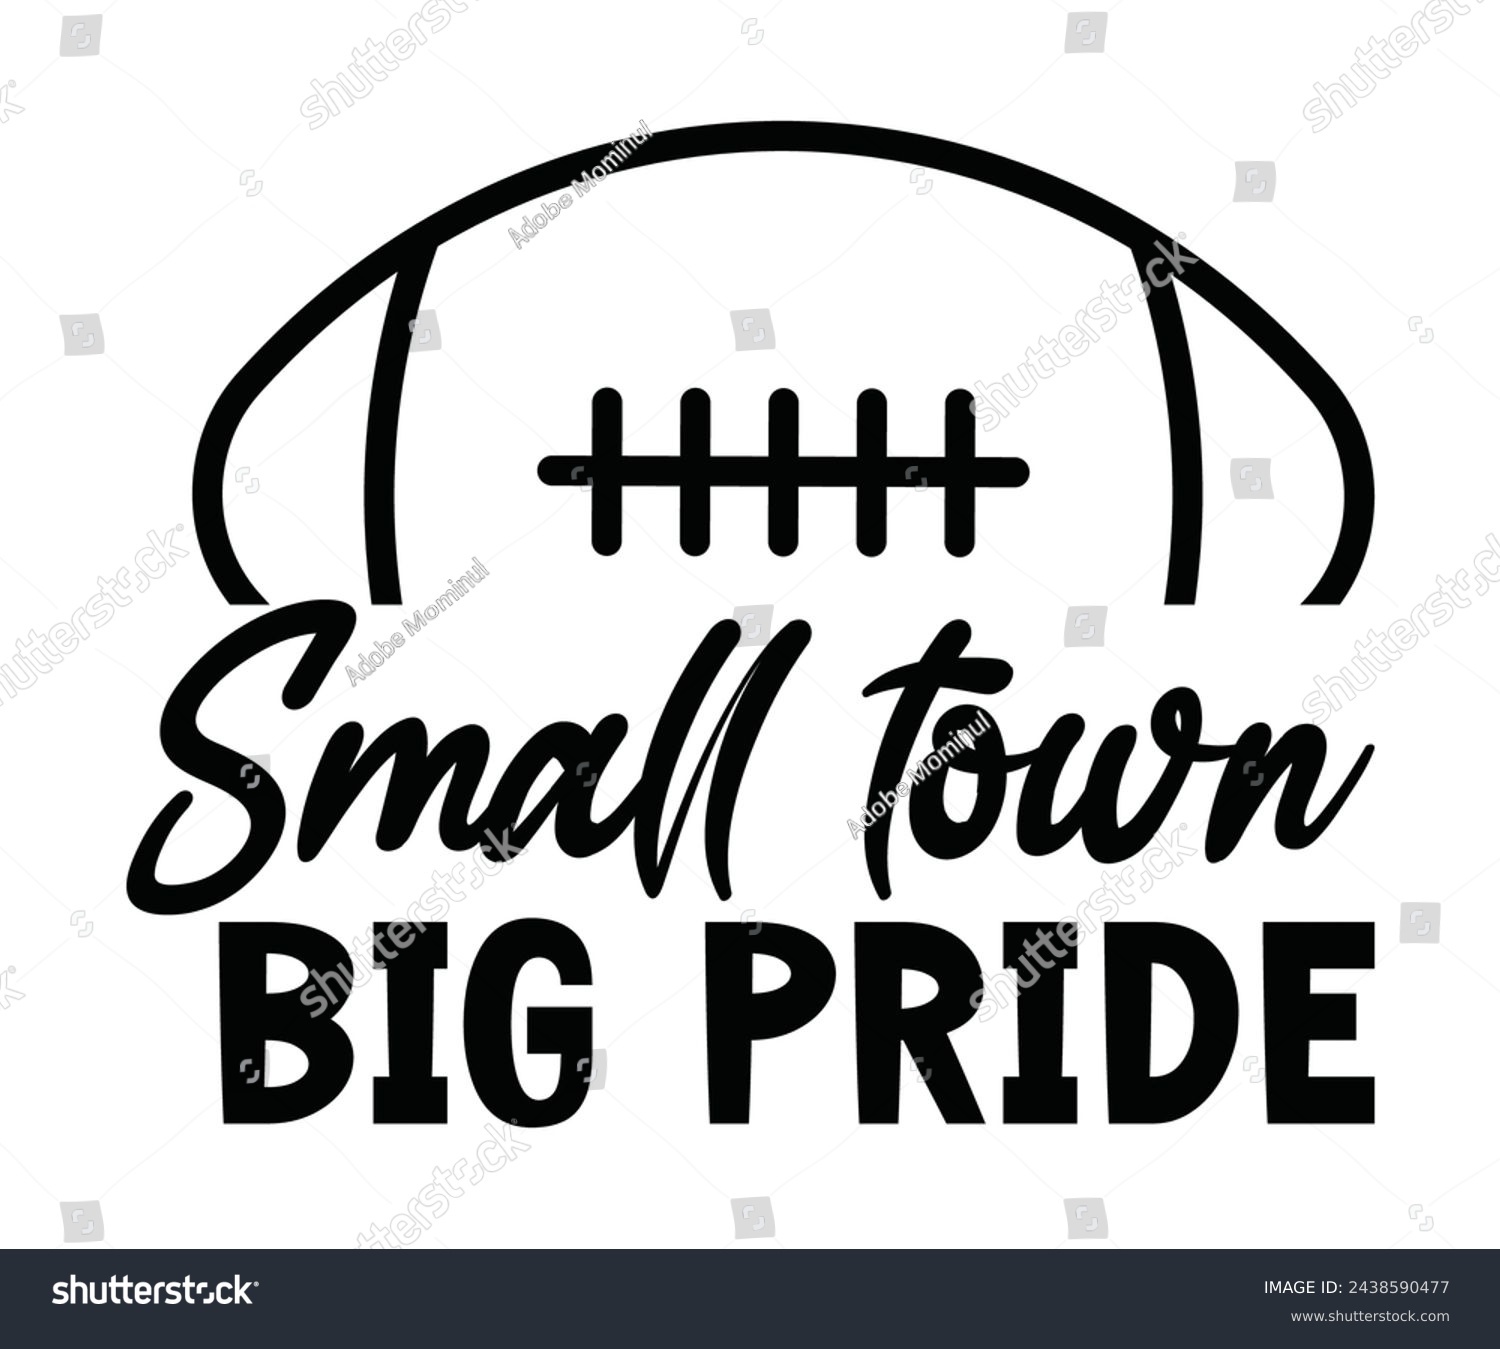 SVG of Small Town Big Pride,Football Svg,Football Player Svg,Game Day Shirt,Football Quotes Svg,American Football Svg,Soccer Svg,Cut File,Commercial use svg